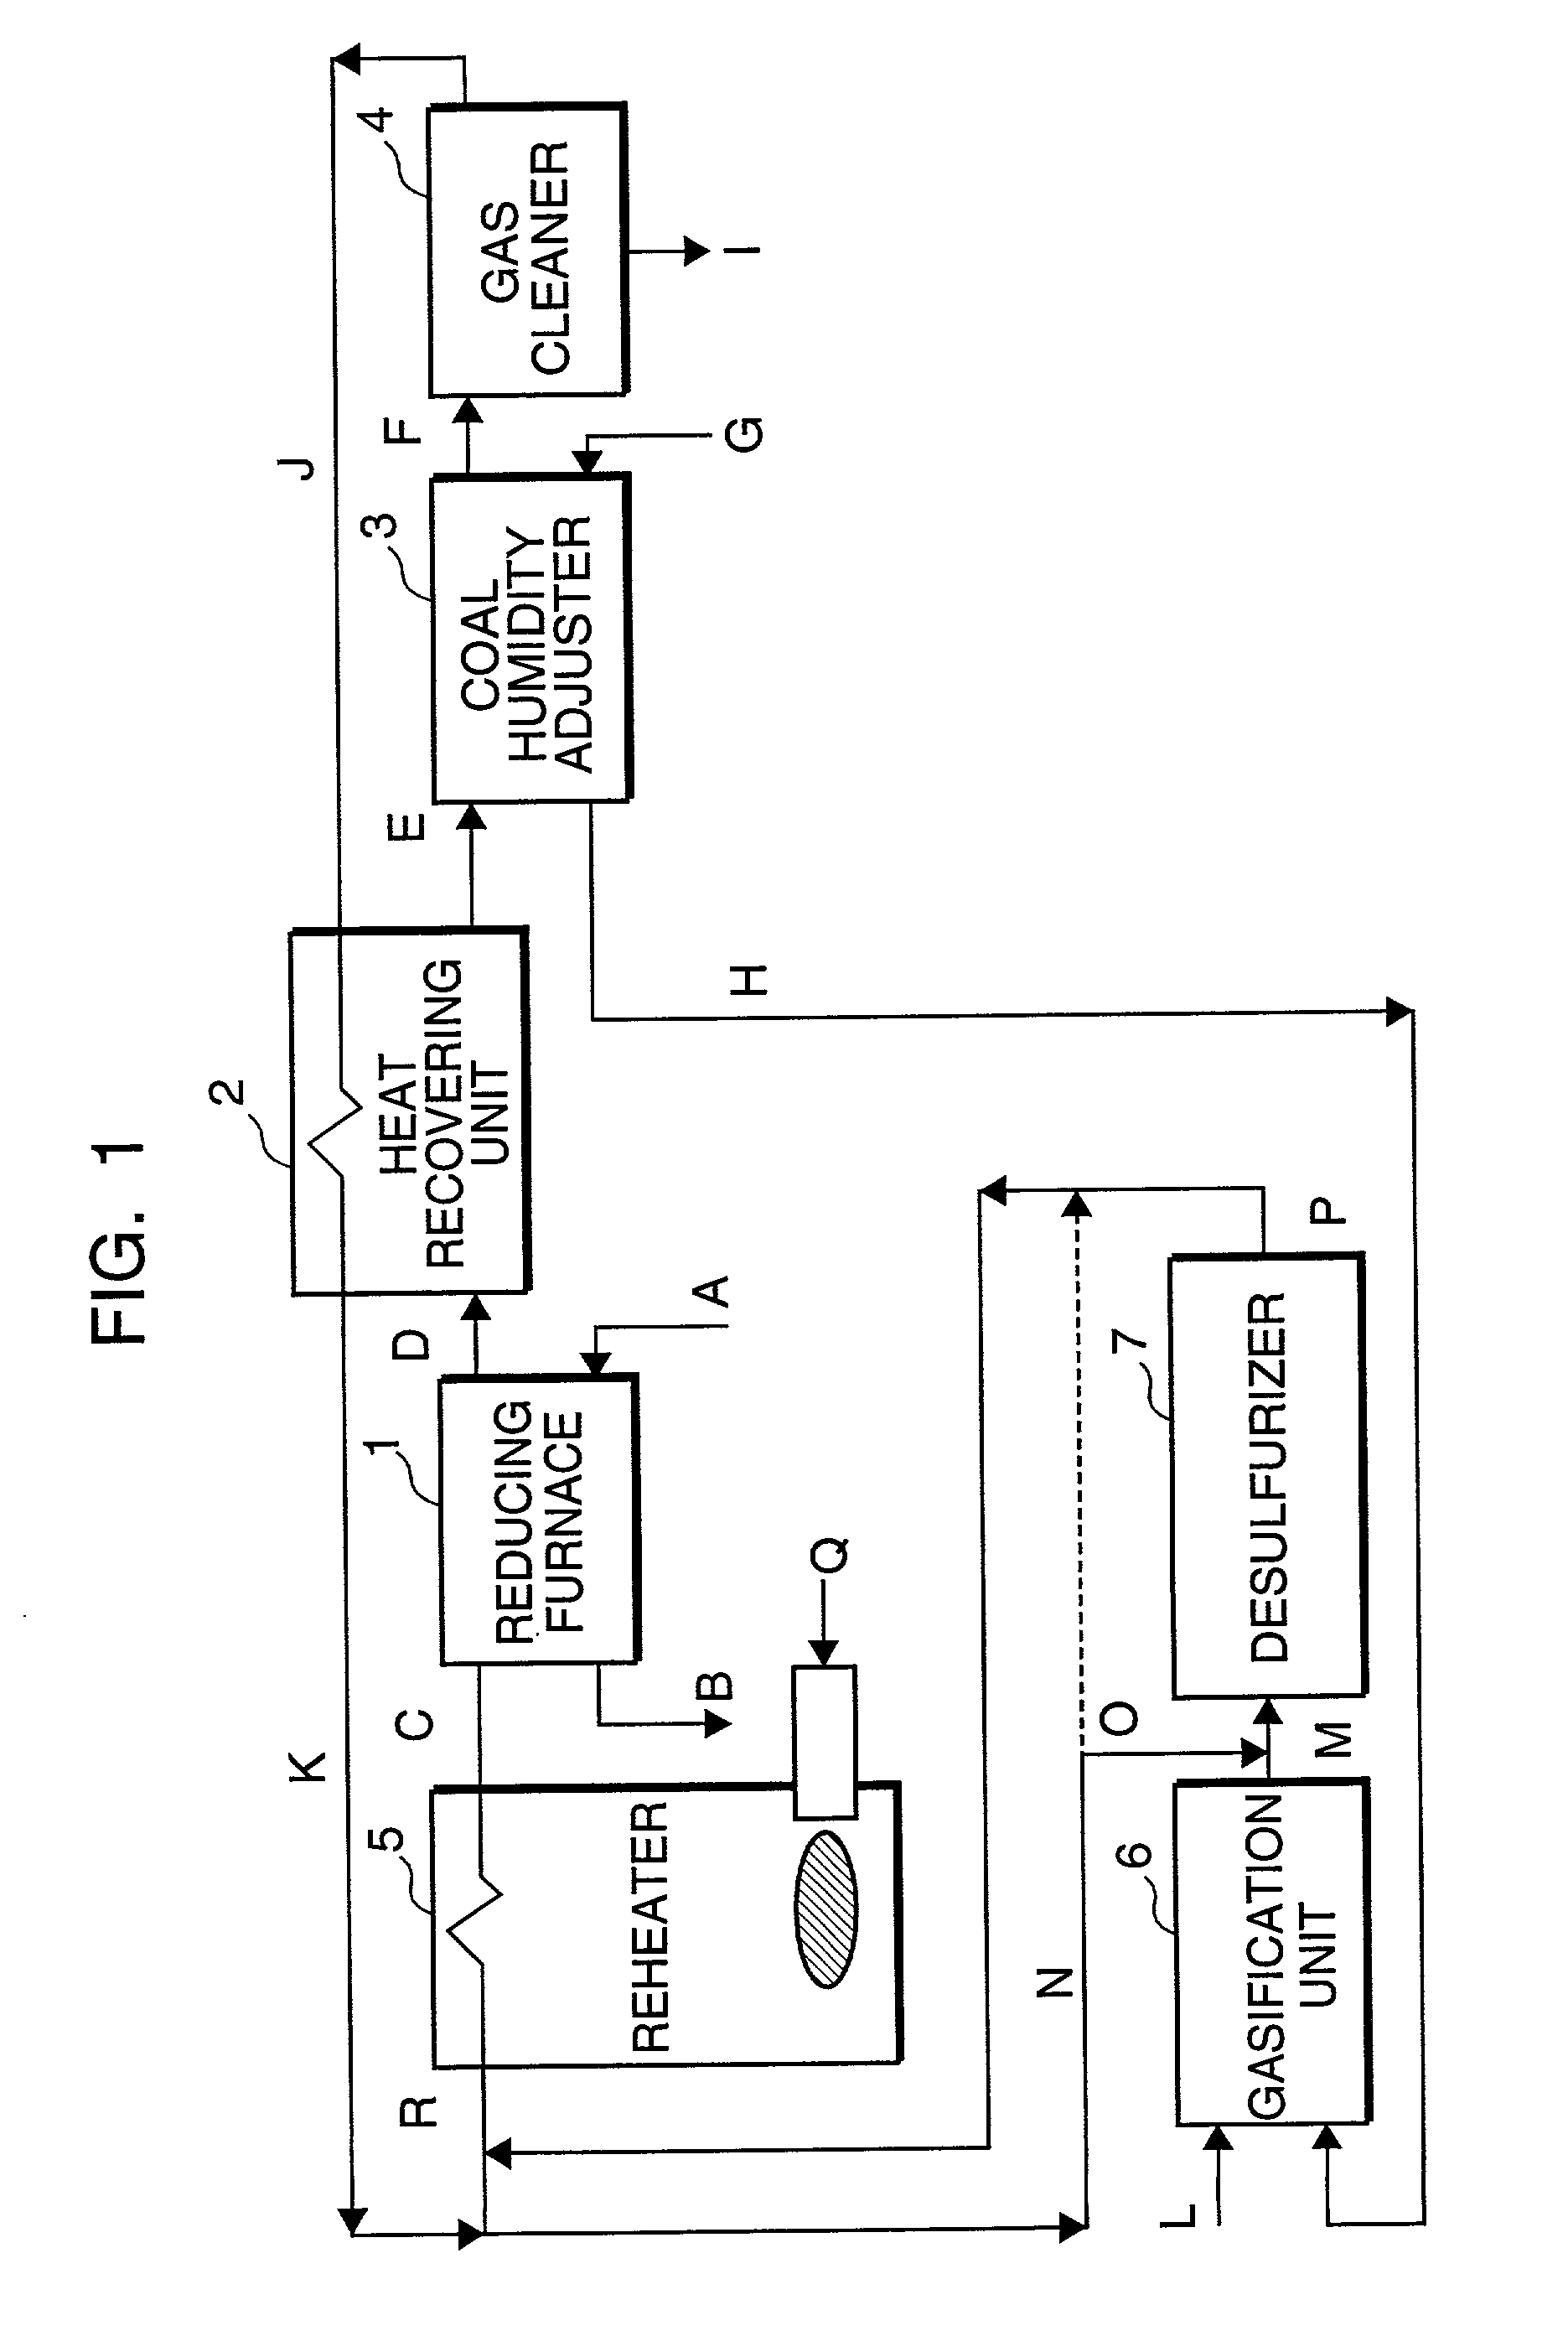 Method of producing direct reduced iron with use of coal-derived gas